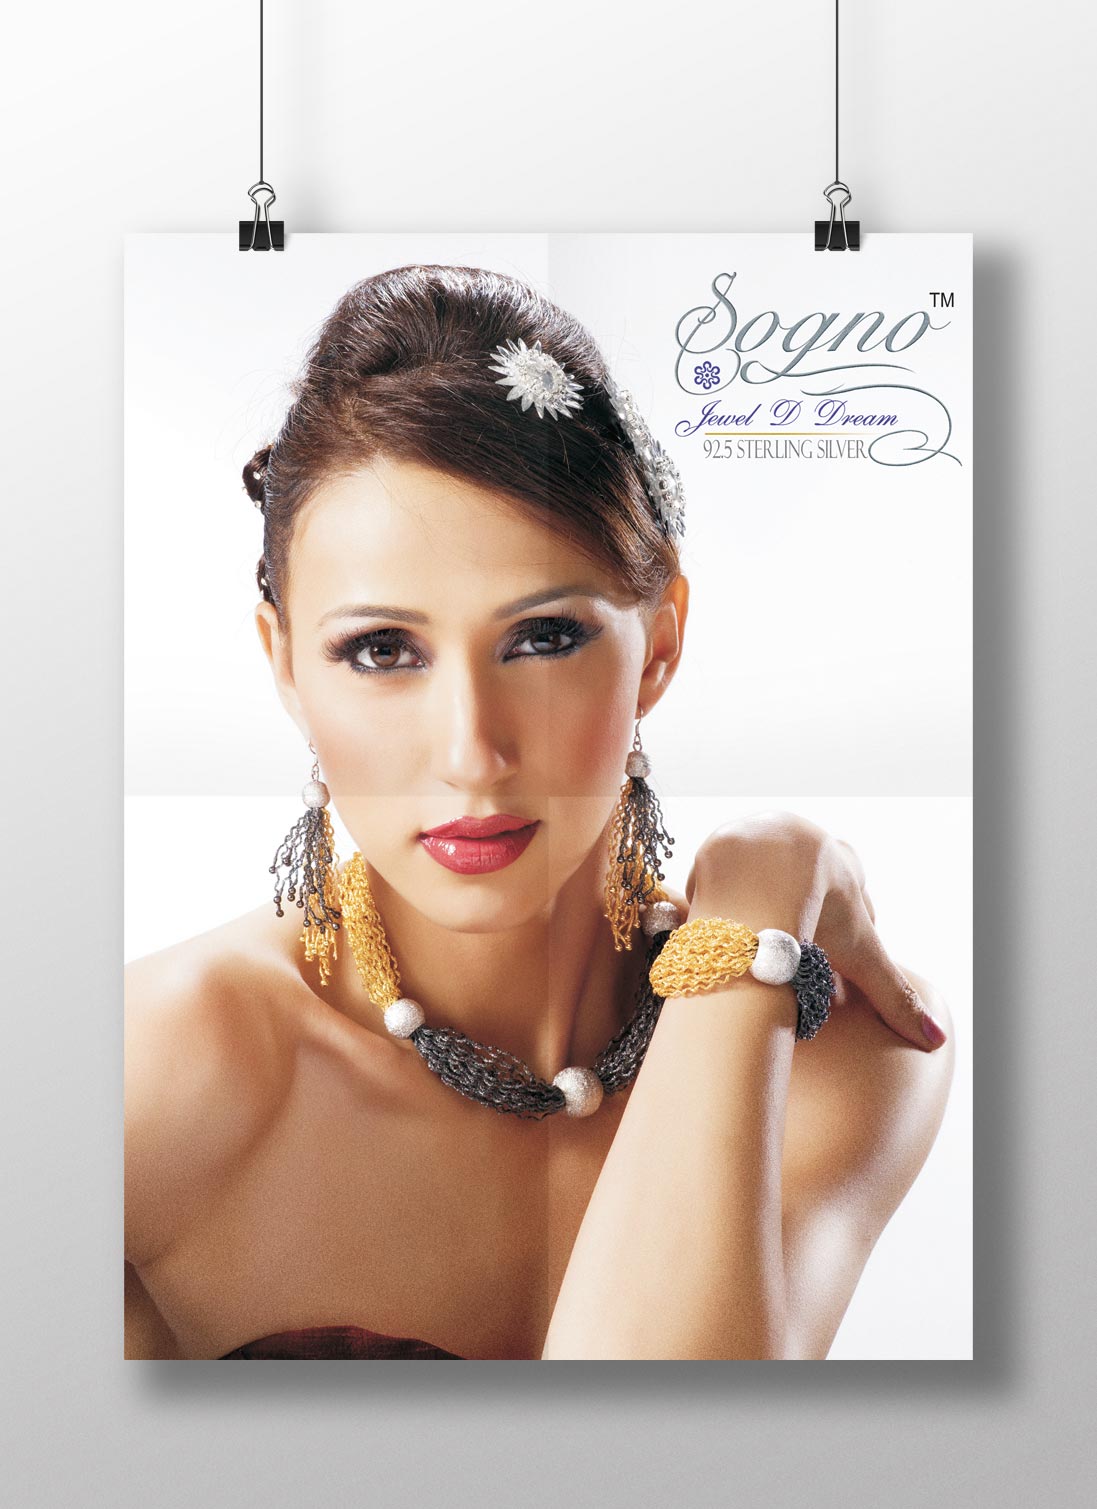 Posters for Sogno jewels